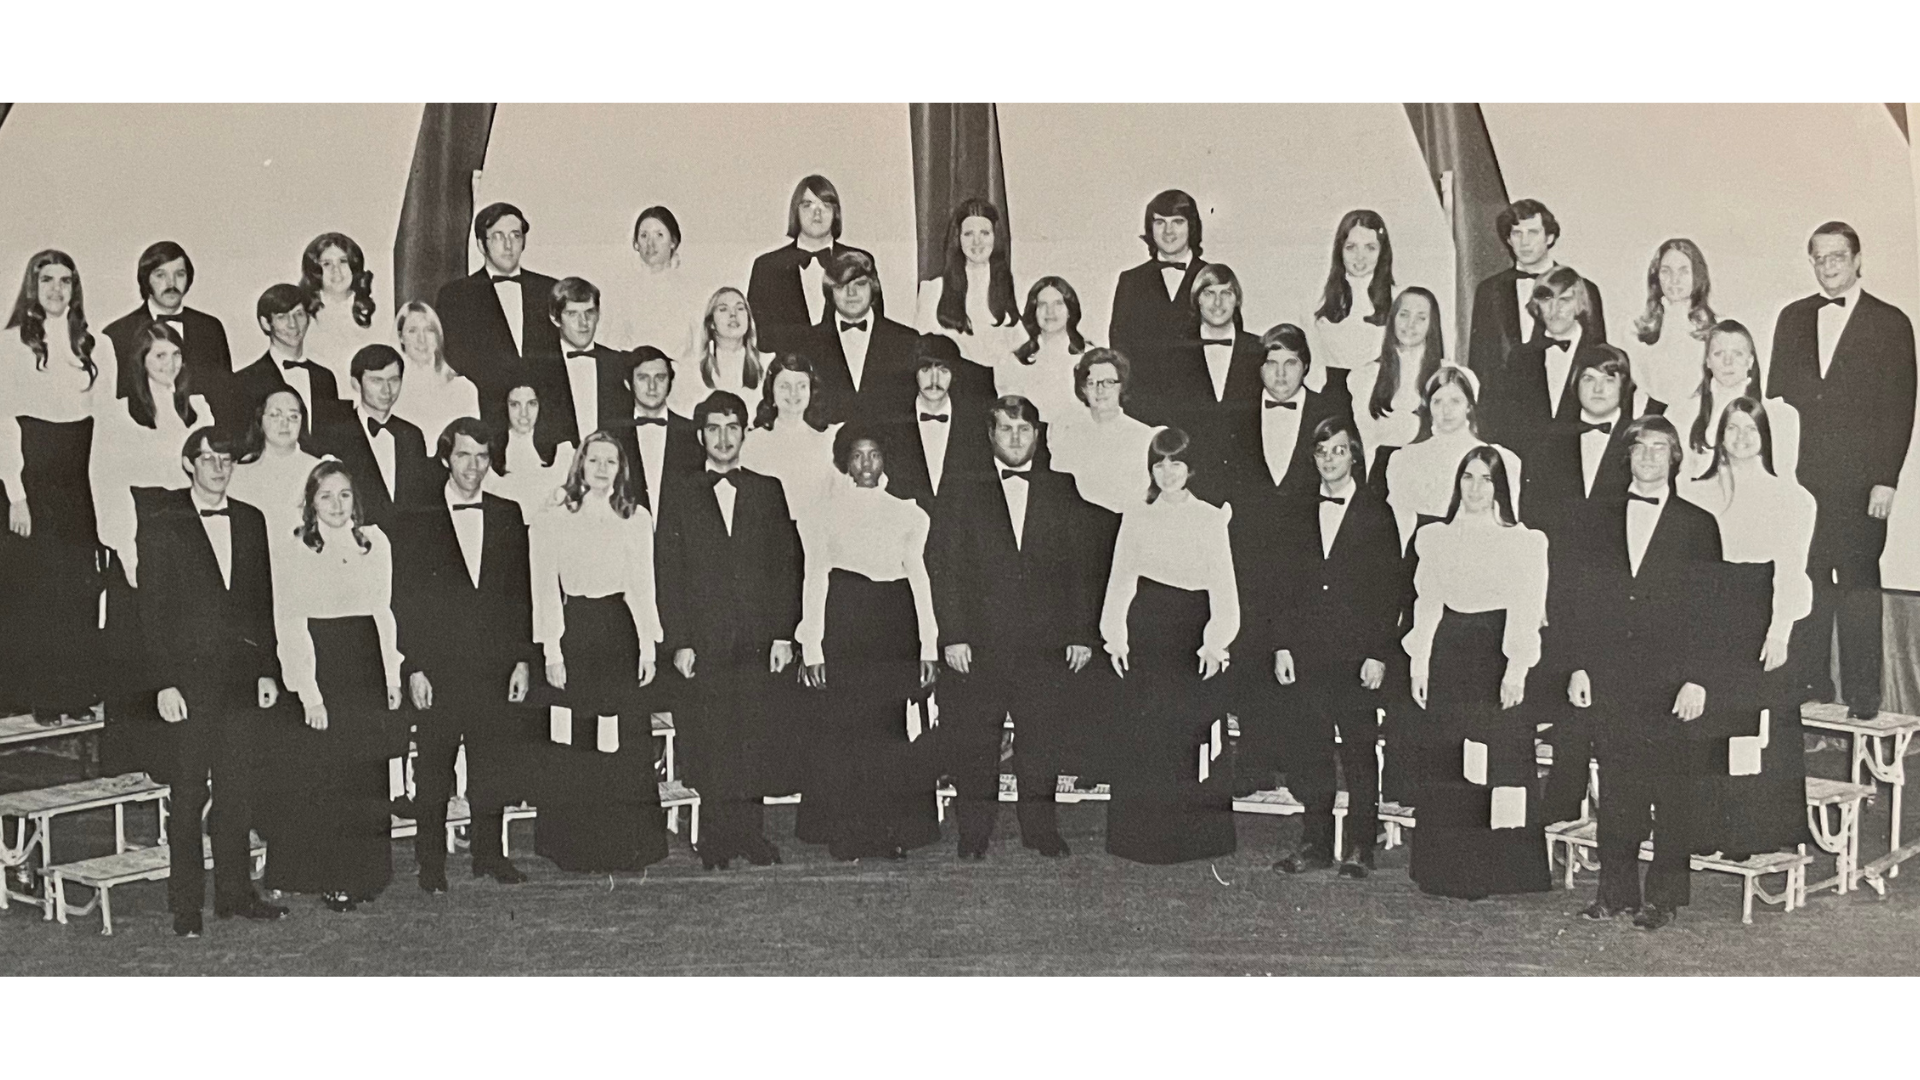 Historical photo of the A-State Concert Choir on risers.  Women are in white tops and black shirts, men are wearing tuxedos.